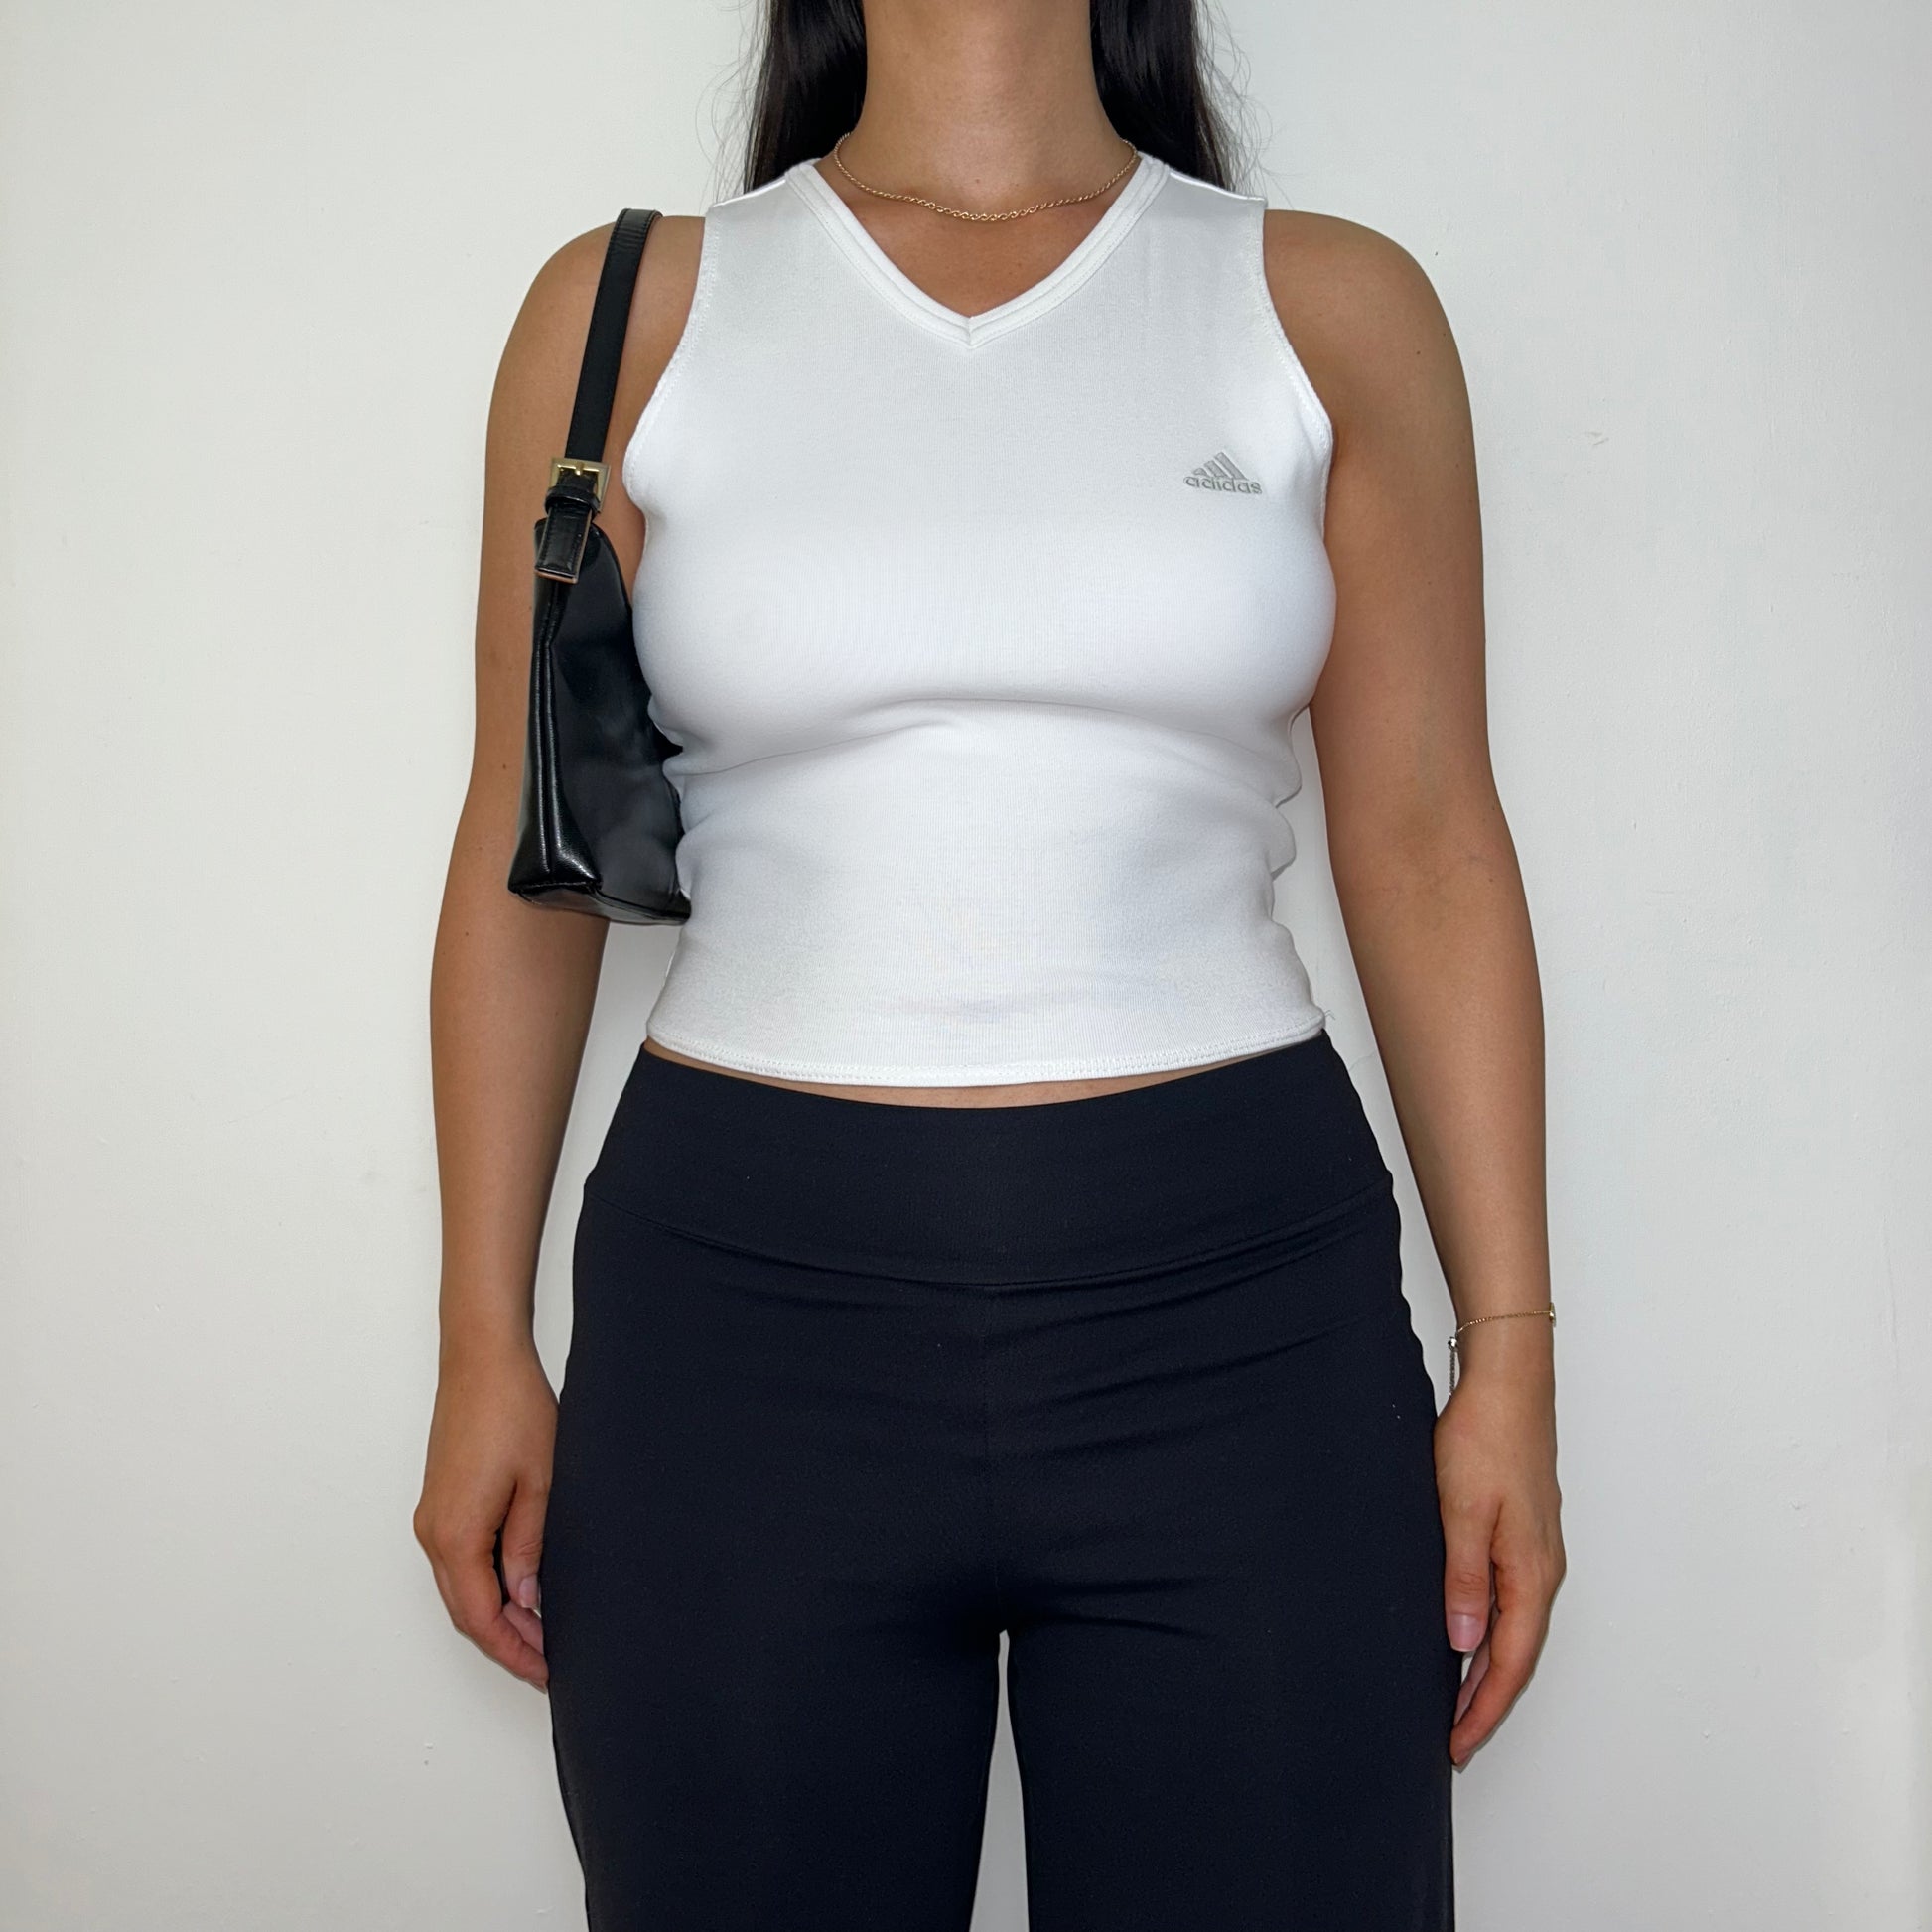 white sleeveless crop top with grey adidas logo shown on a model wearing black trousers and a black shoulder bag